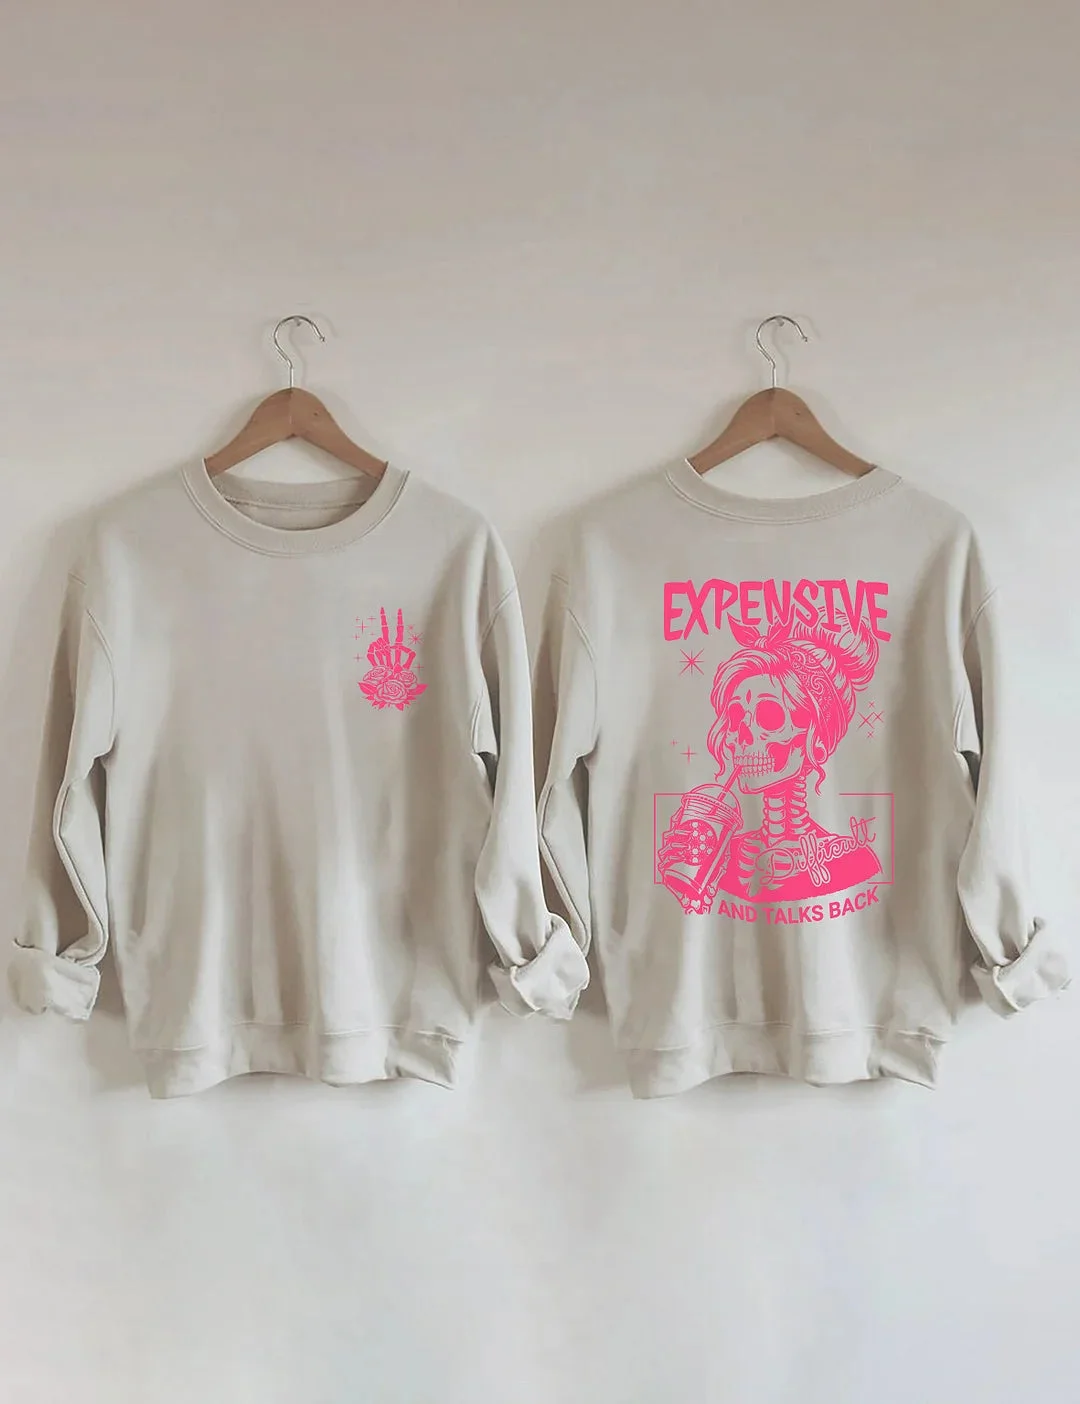 Expensive Difficult And Talks Back Printed Long Sleeves Sweatshirt